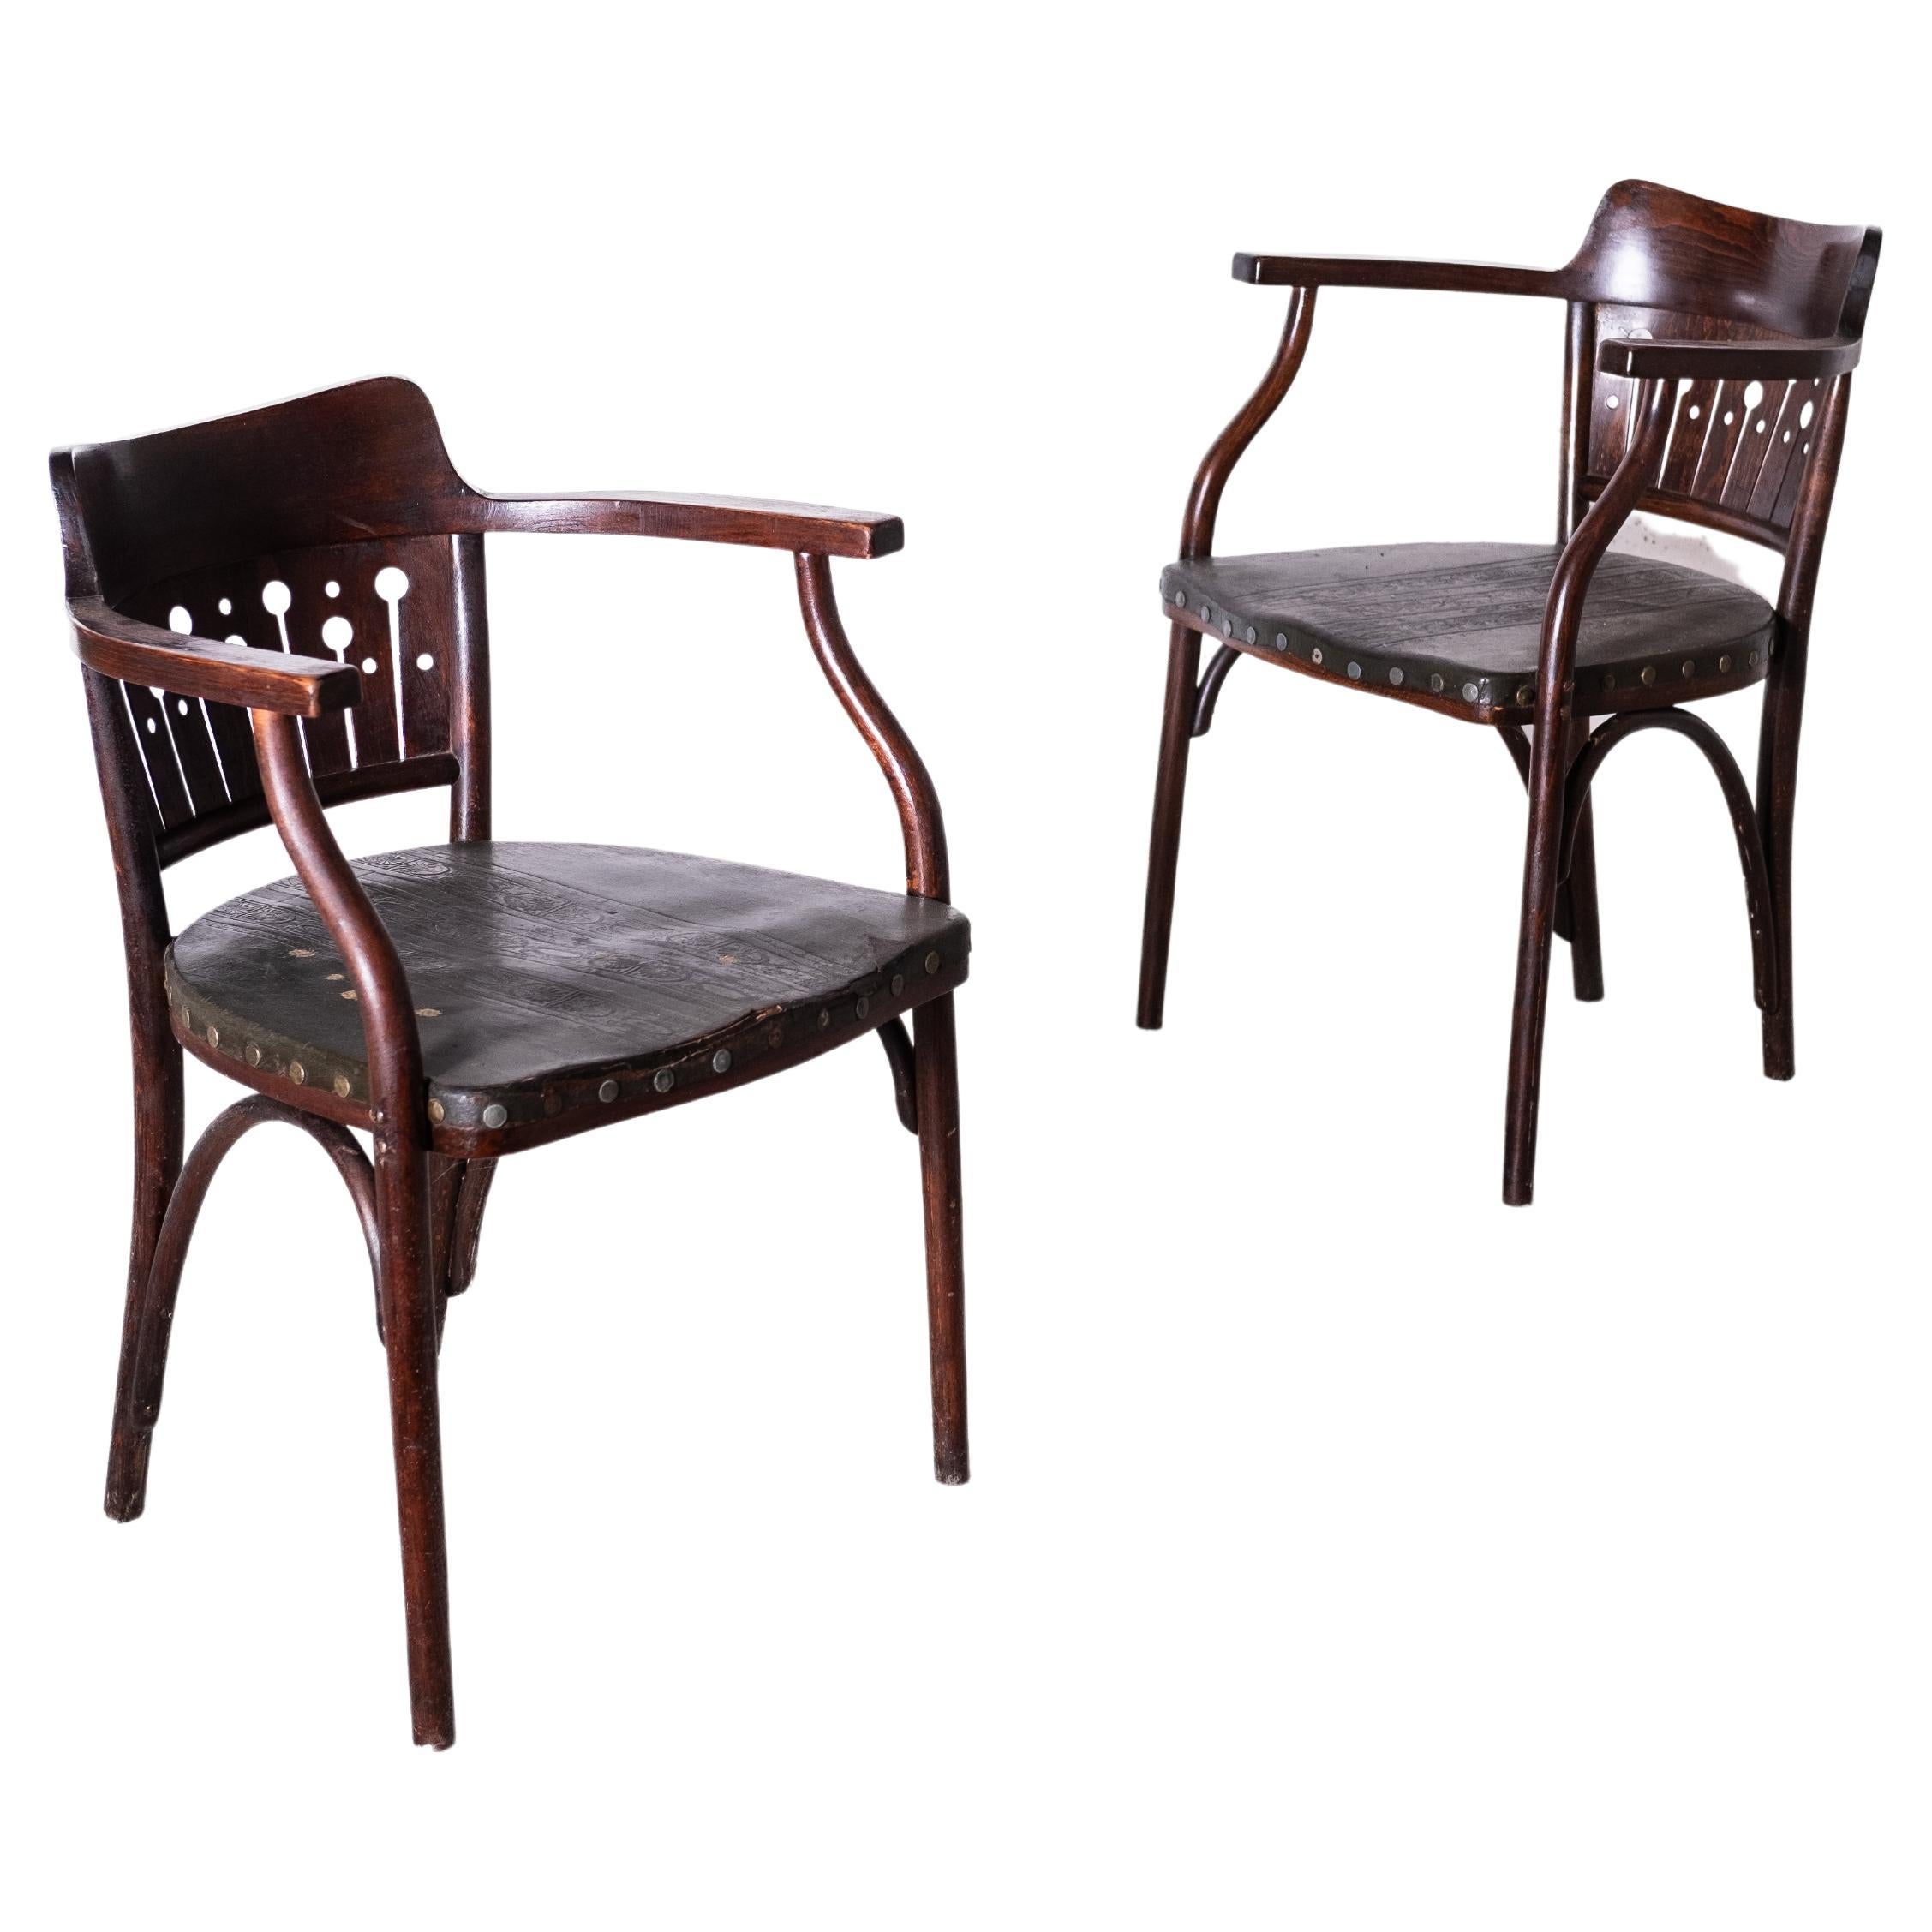 Art Nouveau Bentwood Armchairs by O. Wagner / G. Siegel, Thonet, Set of 2, 1905